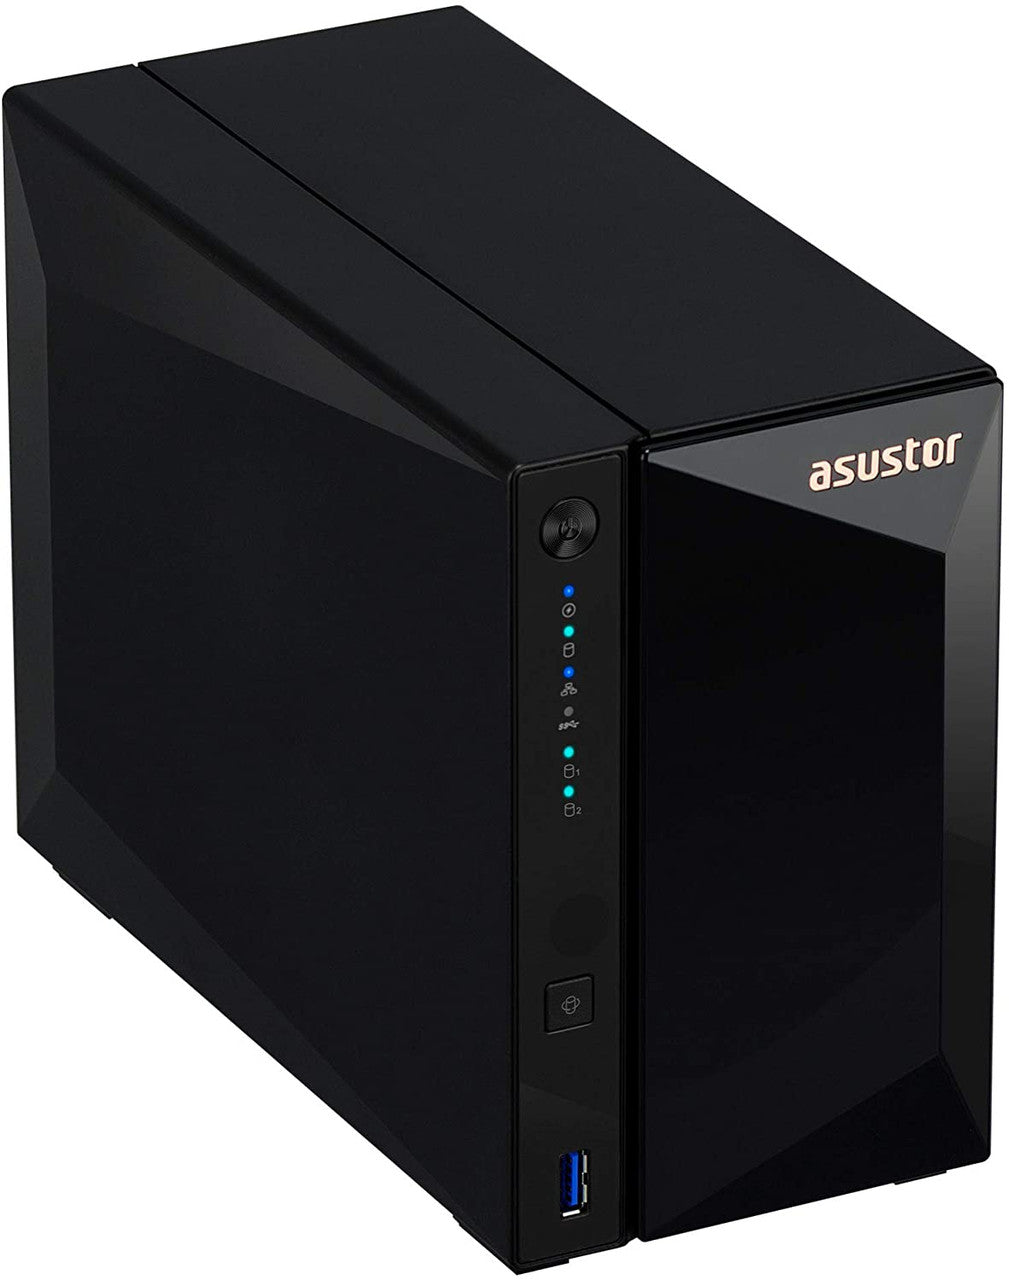 Asustor AS3302T 2-Bay Drivestor 2 PRO NAS with 2GB RAM and 12TB (2x6TB) Western Digital RED PRO Drives Fully Assembled and Tested